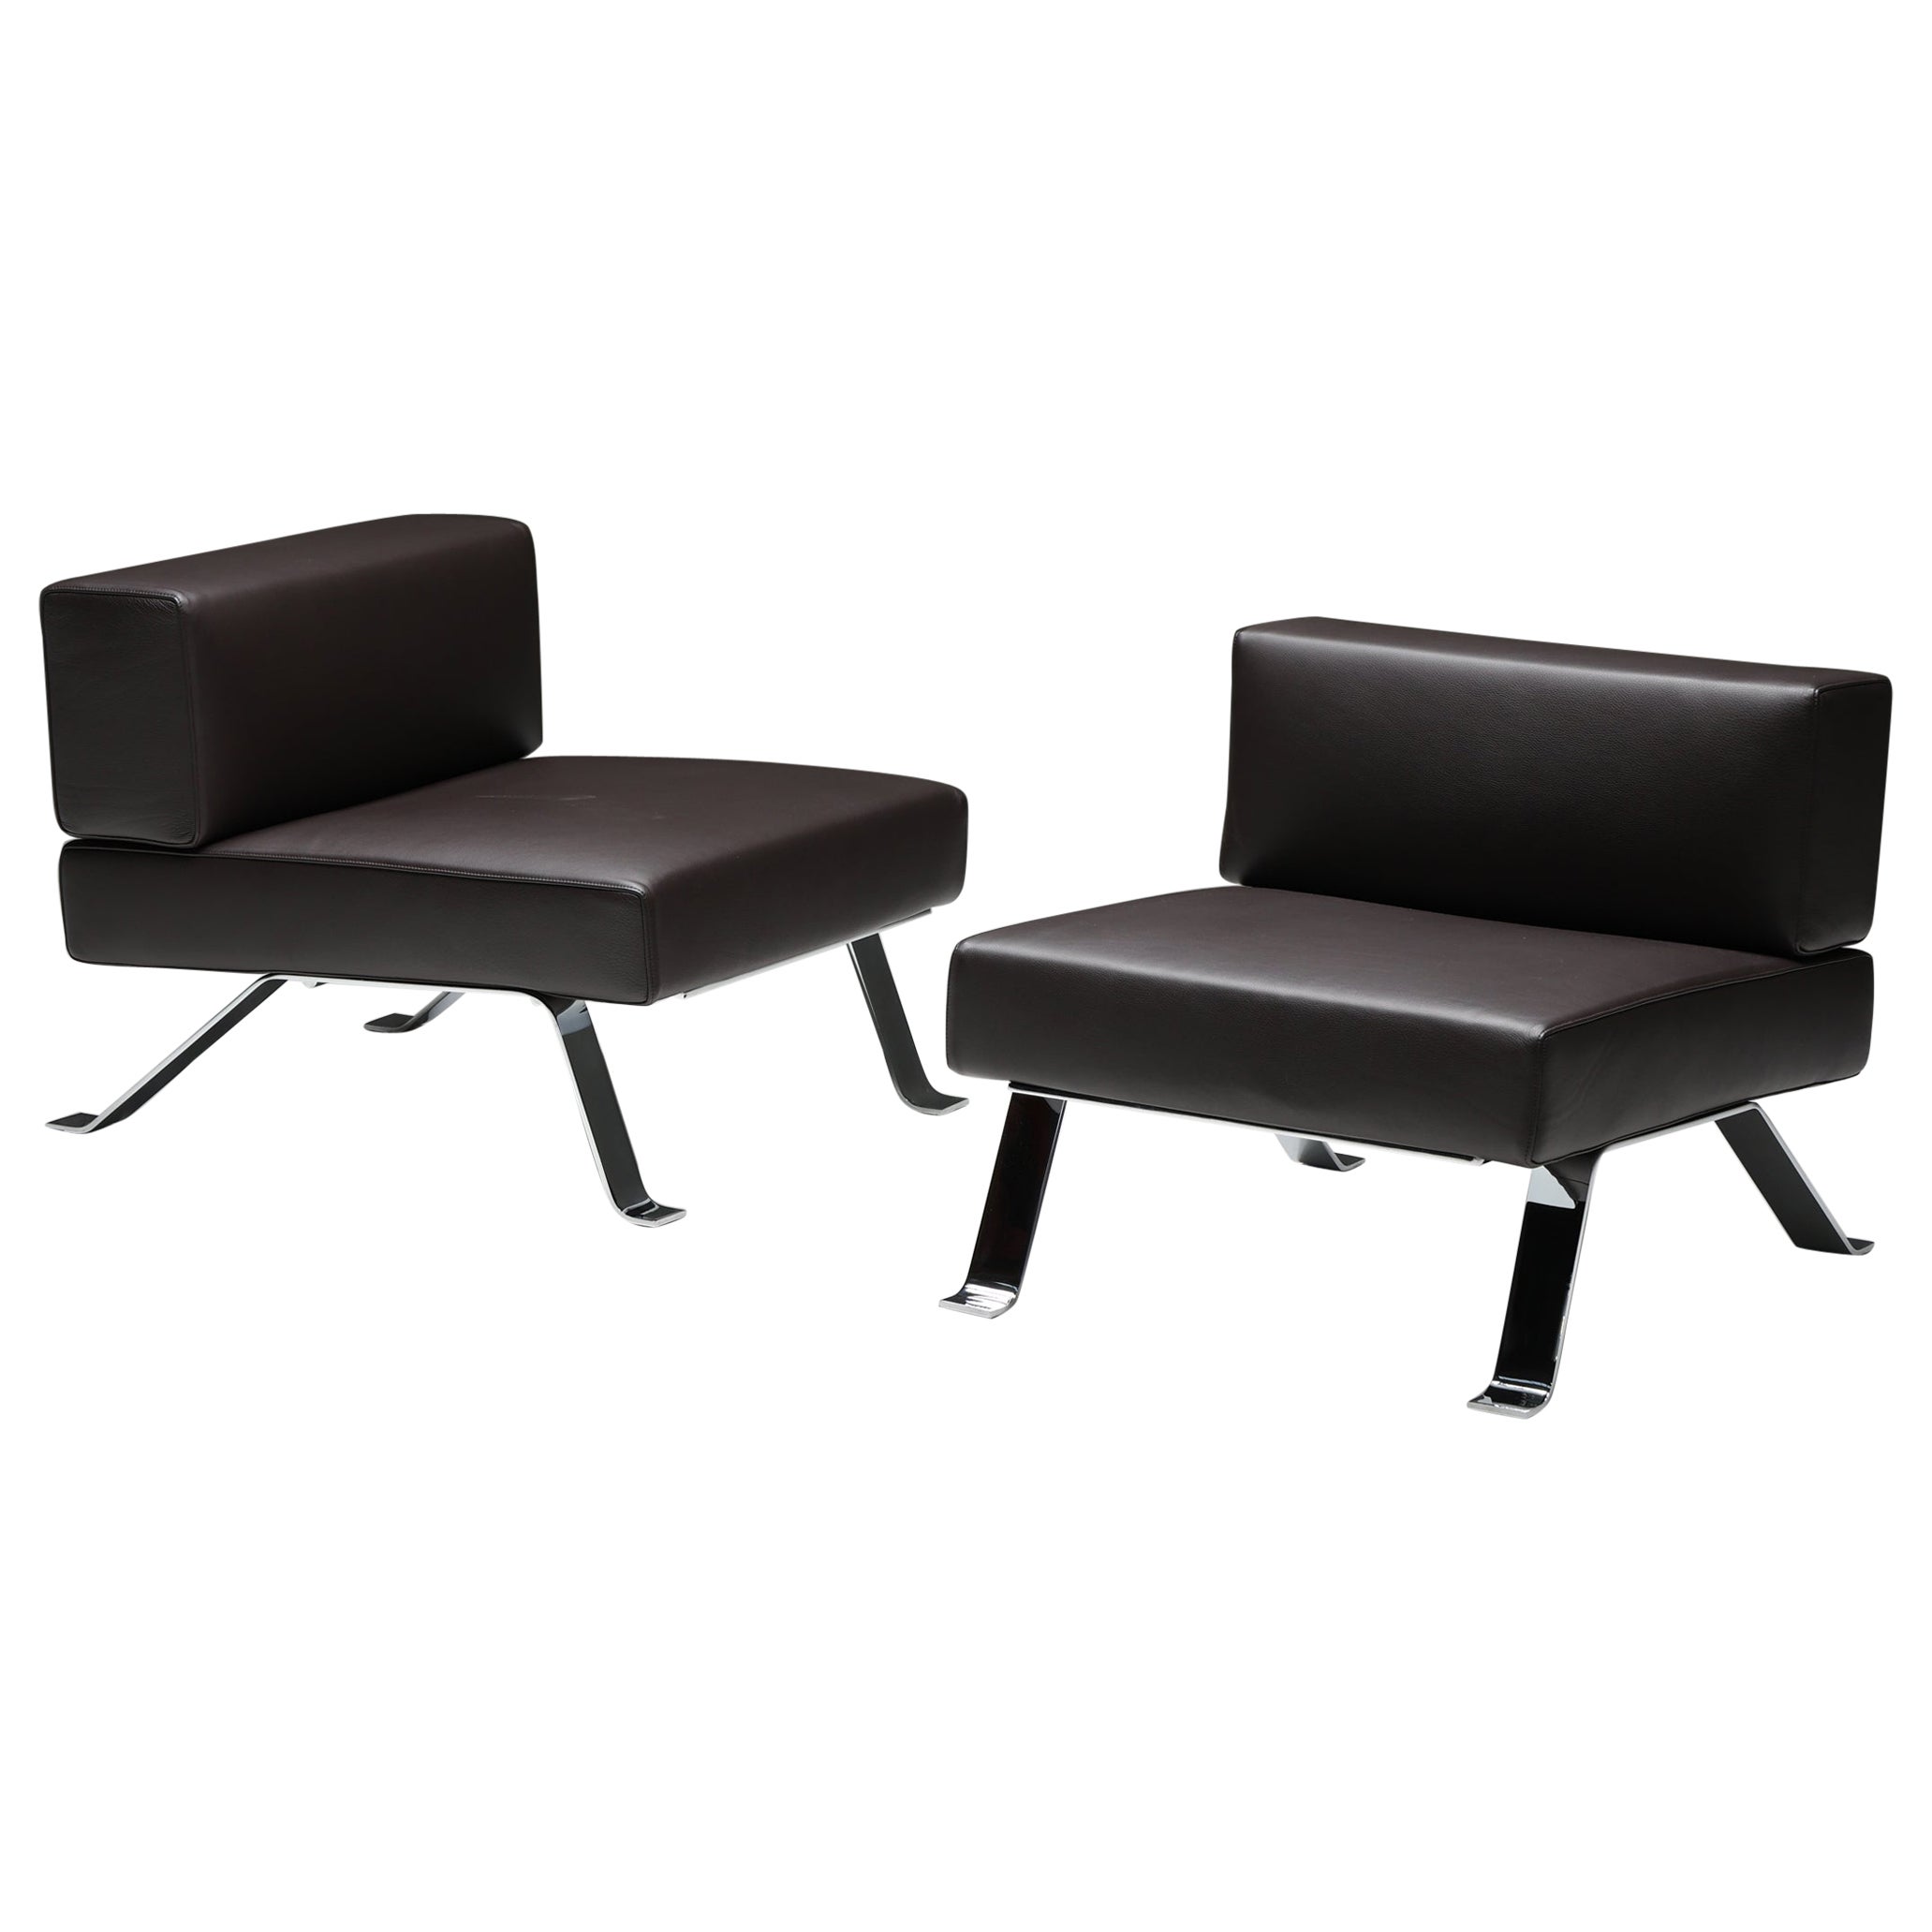 Charlotte Perriand Ombra Loungesessel für Cassina, Italien, 2004